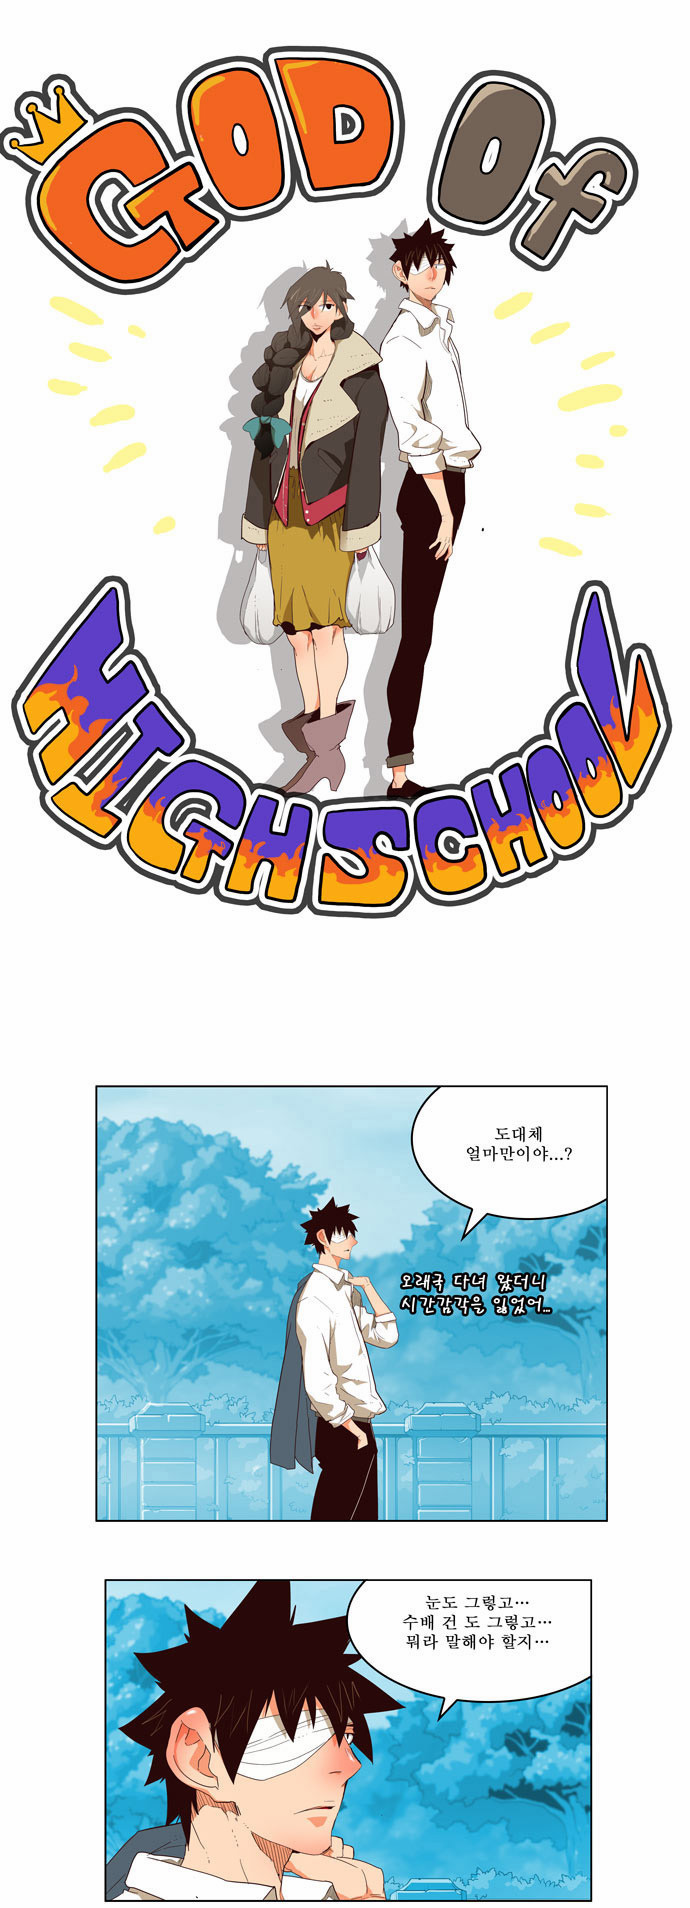 The God of High School - Chapter 174 - Page 2